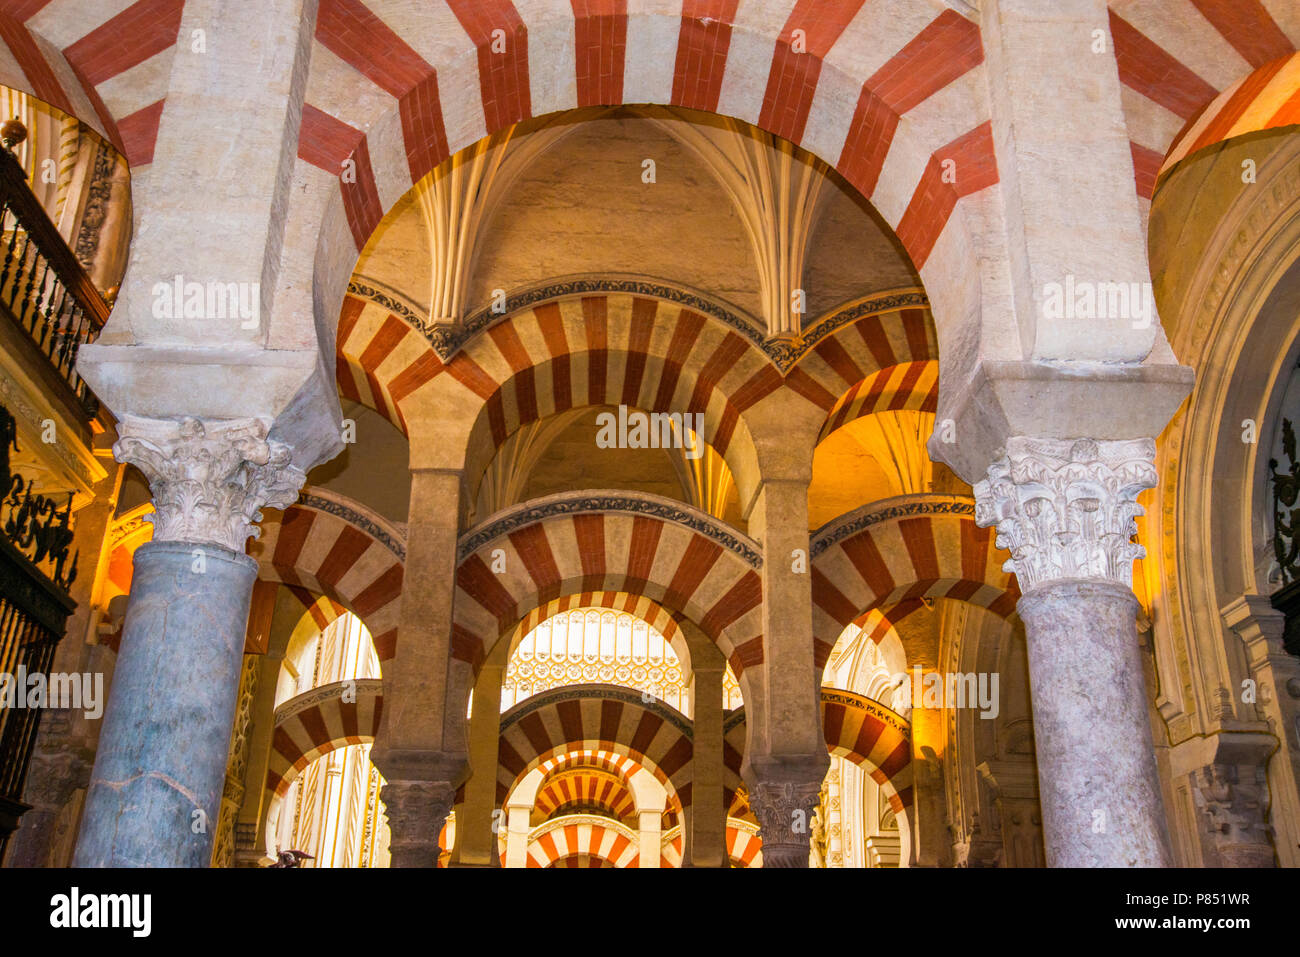 Horseshoe arches. Mosque-cathedral, Cordoba, Spain. Stock Photo